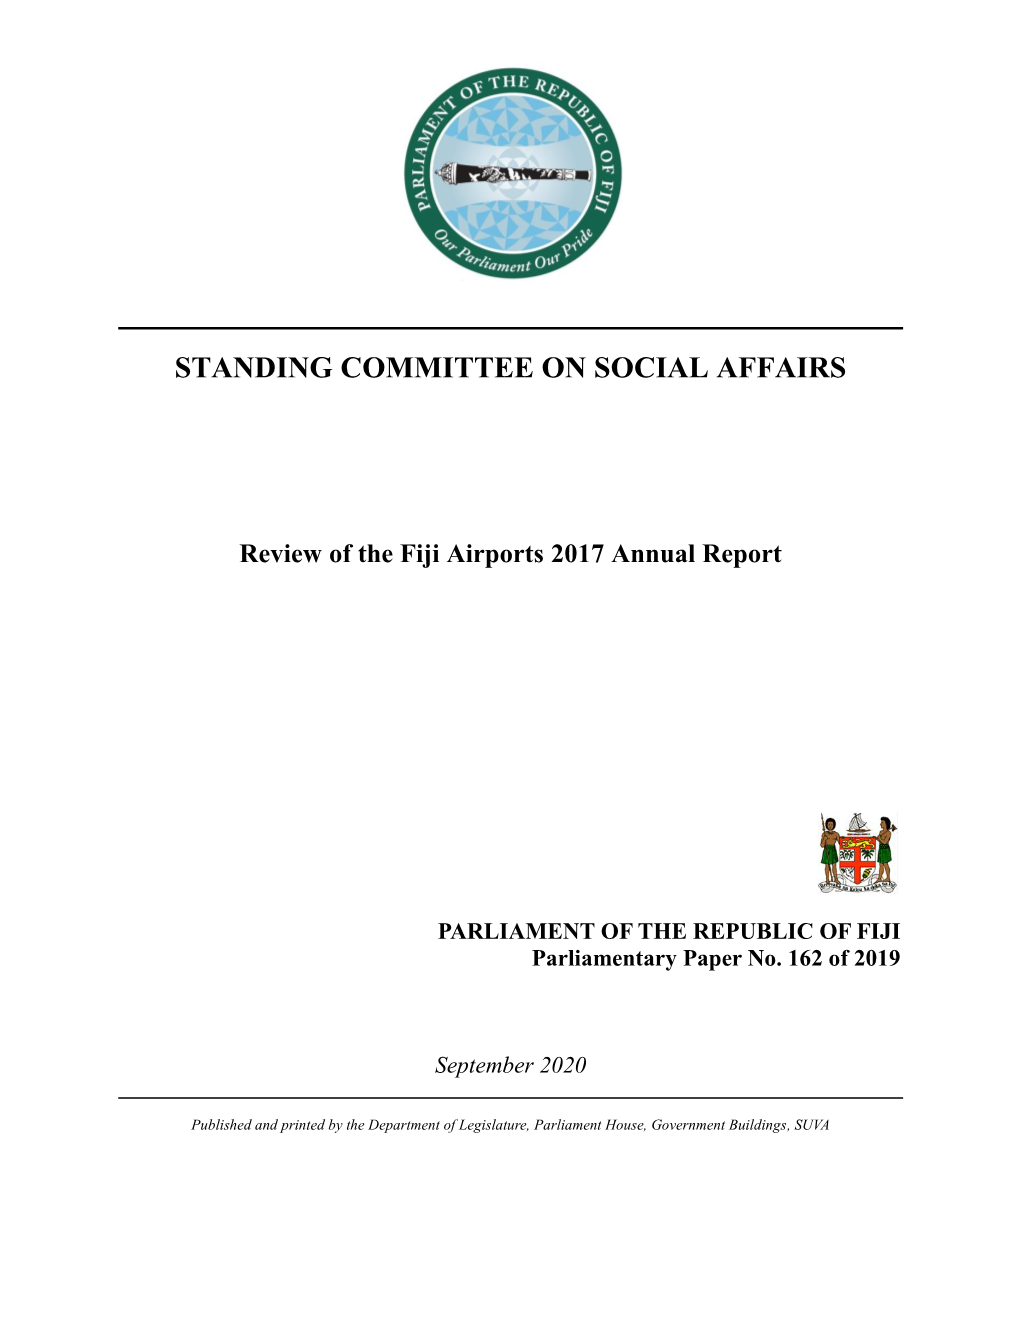 Review of the Fiji Airports 2017 Annual Report